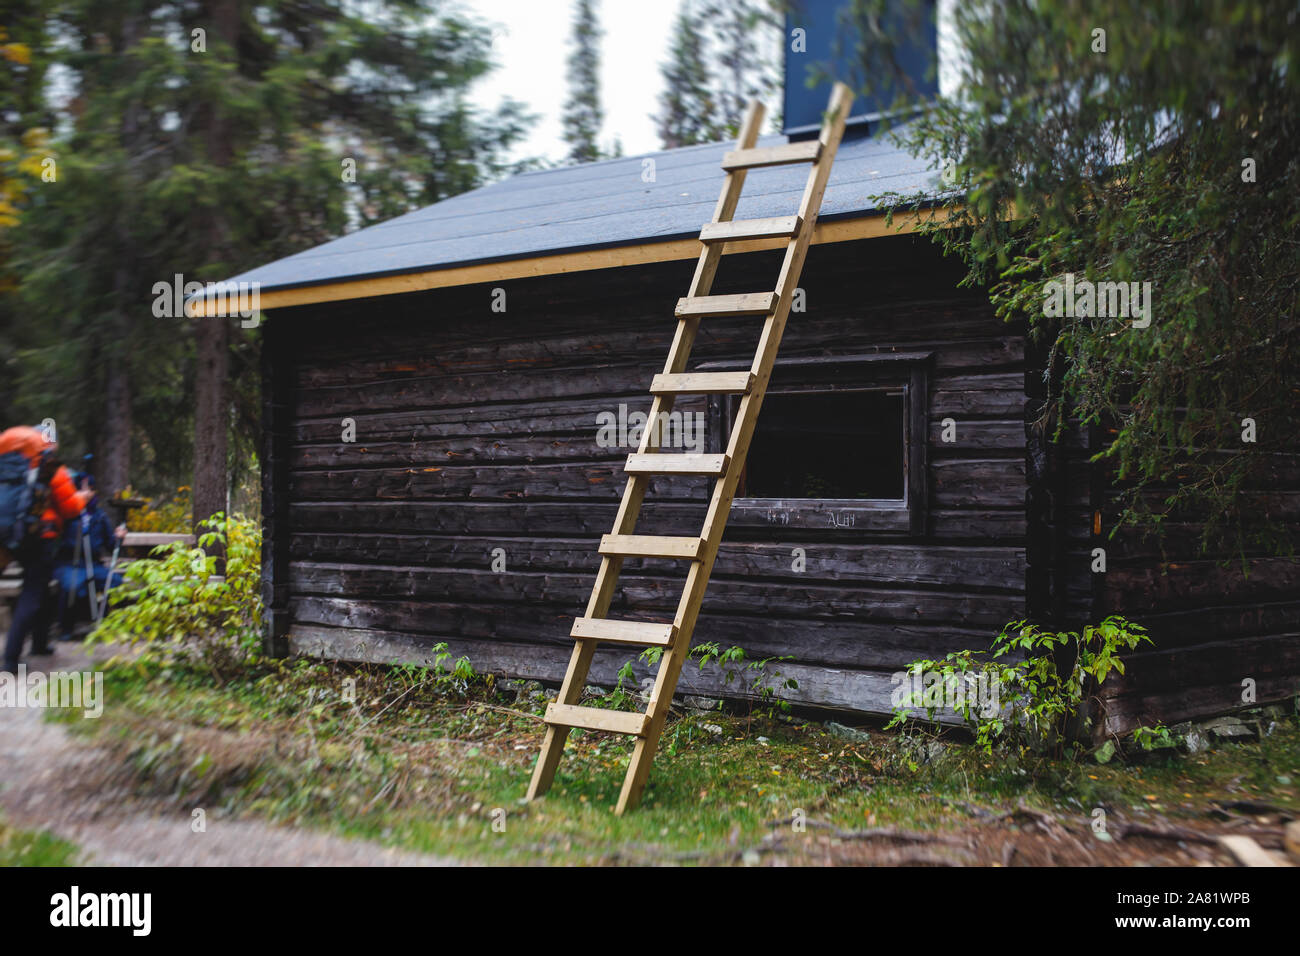 View of finnish National park Oulanka with wooden wilderness hut, cabin  cottage, wooden suspension bridge, wooden ladder steps, campground, Finland  Stock Photo - Alamy